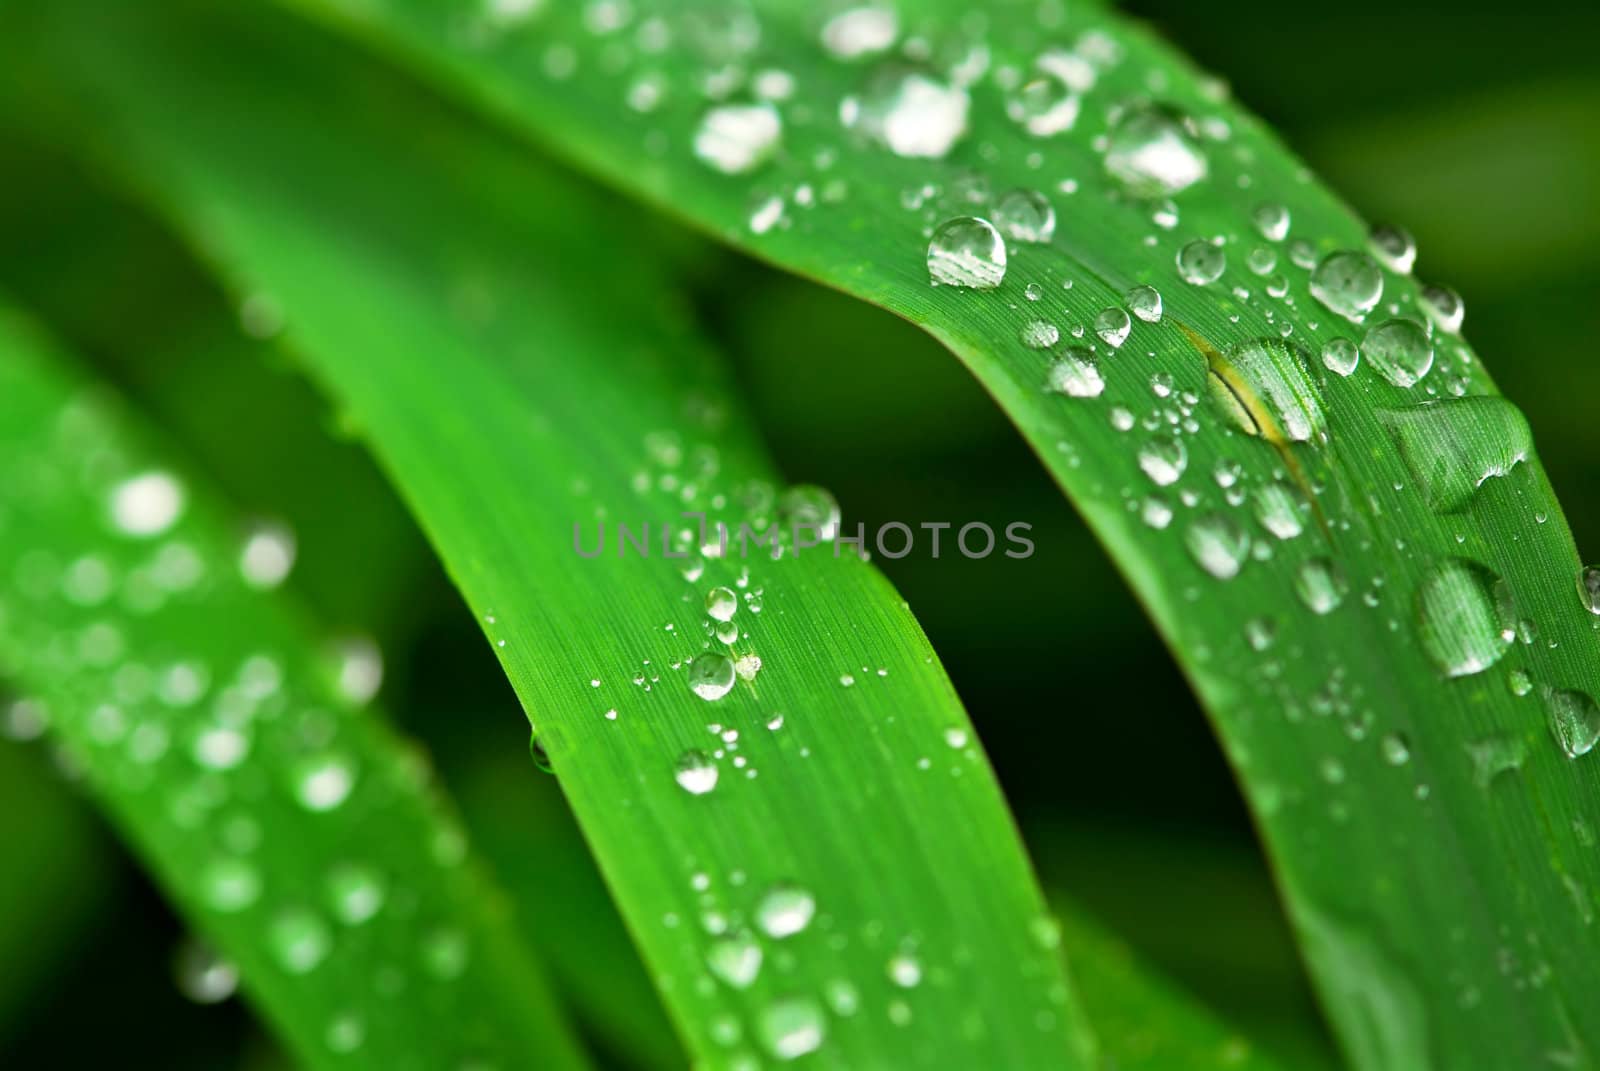 Raindrops on grass by elenathewise